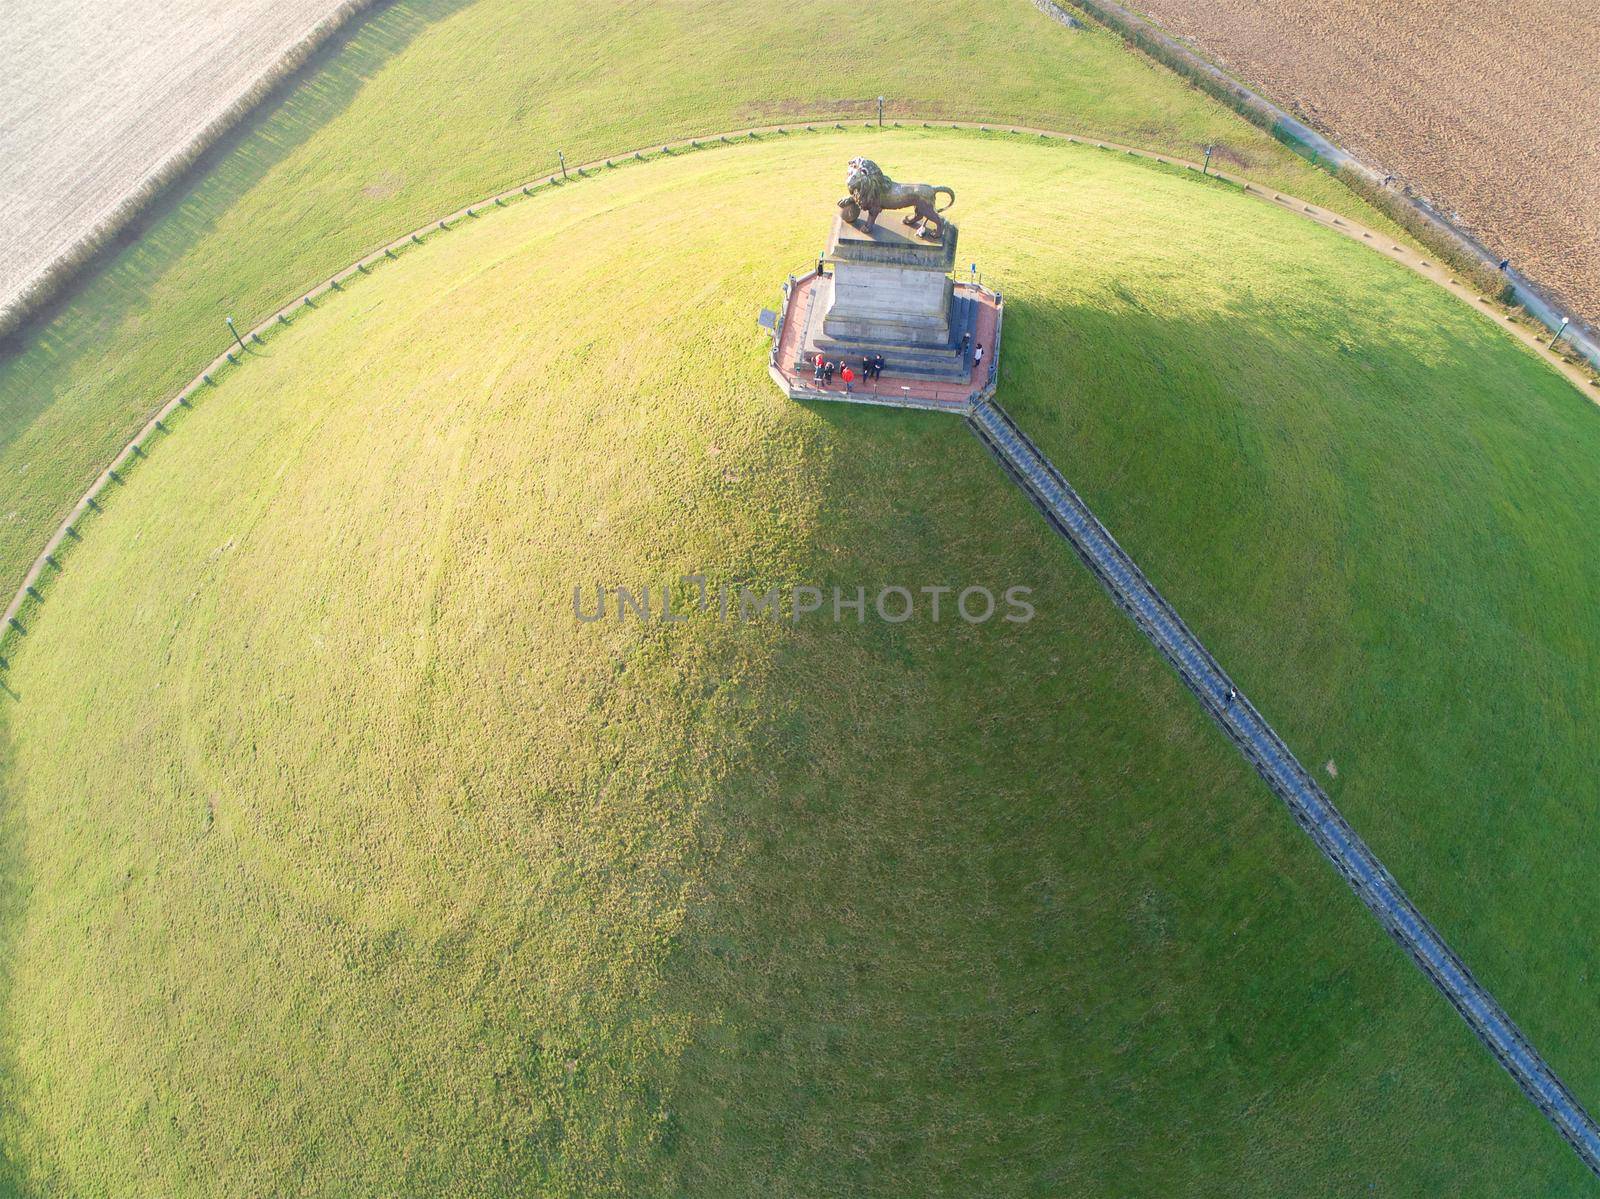 Aerial view of The Lion's Mound with farm land around. The immense Butte Du Lion on the battlefield of Waterloo where Napoleon died. Belgium.